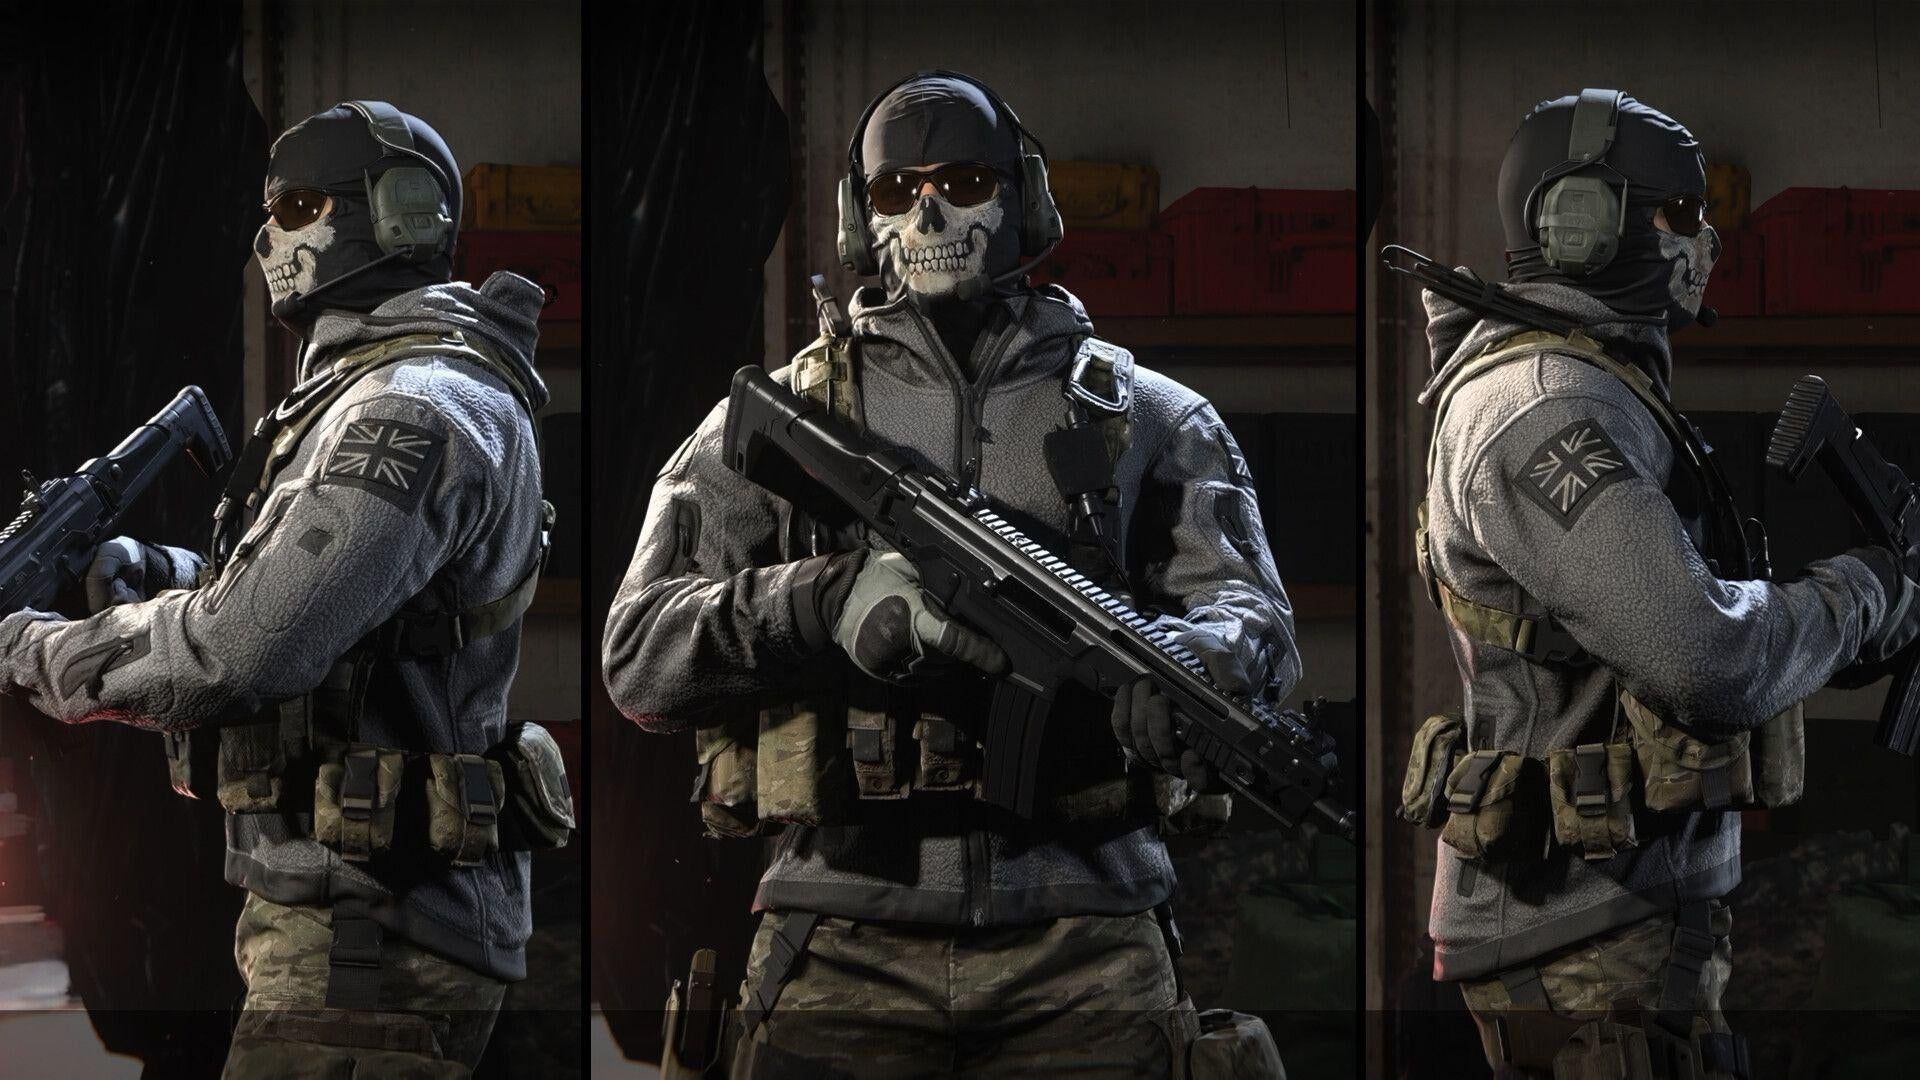 Since the devs said they're bringing a Ghost skin next battle pass, which one would you guys like to see? For me, I would love to have Classic Ghost